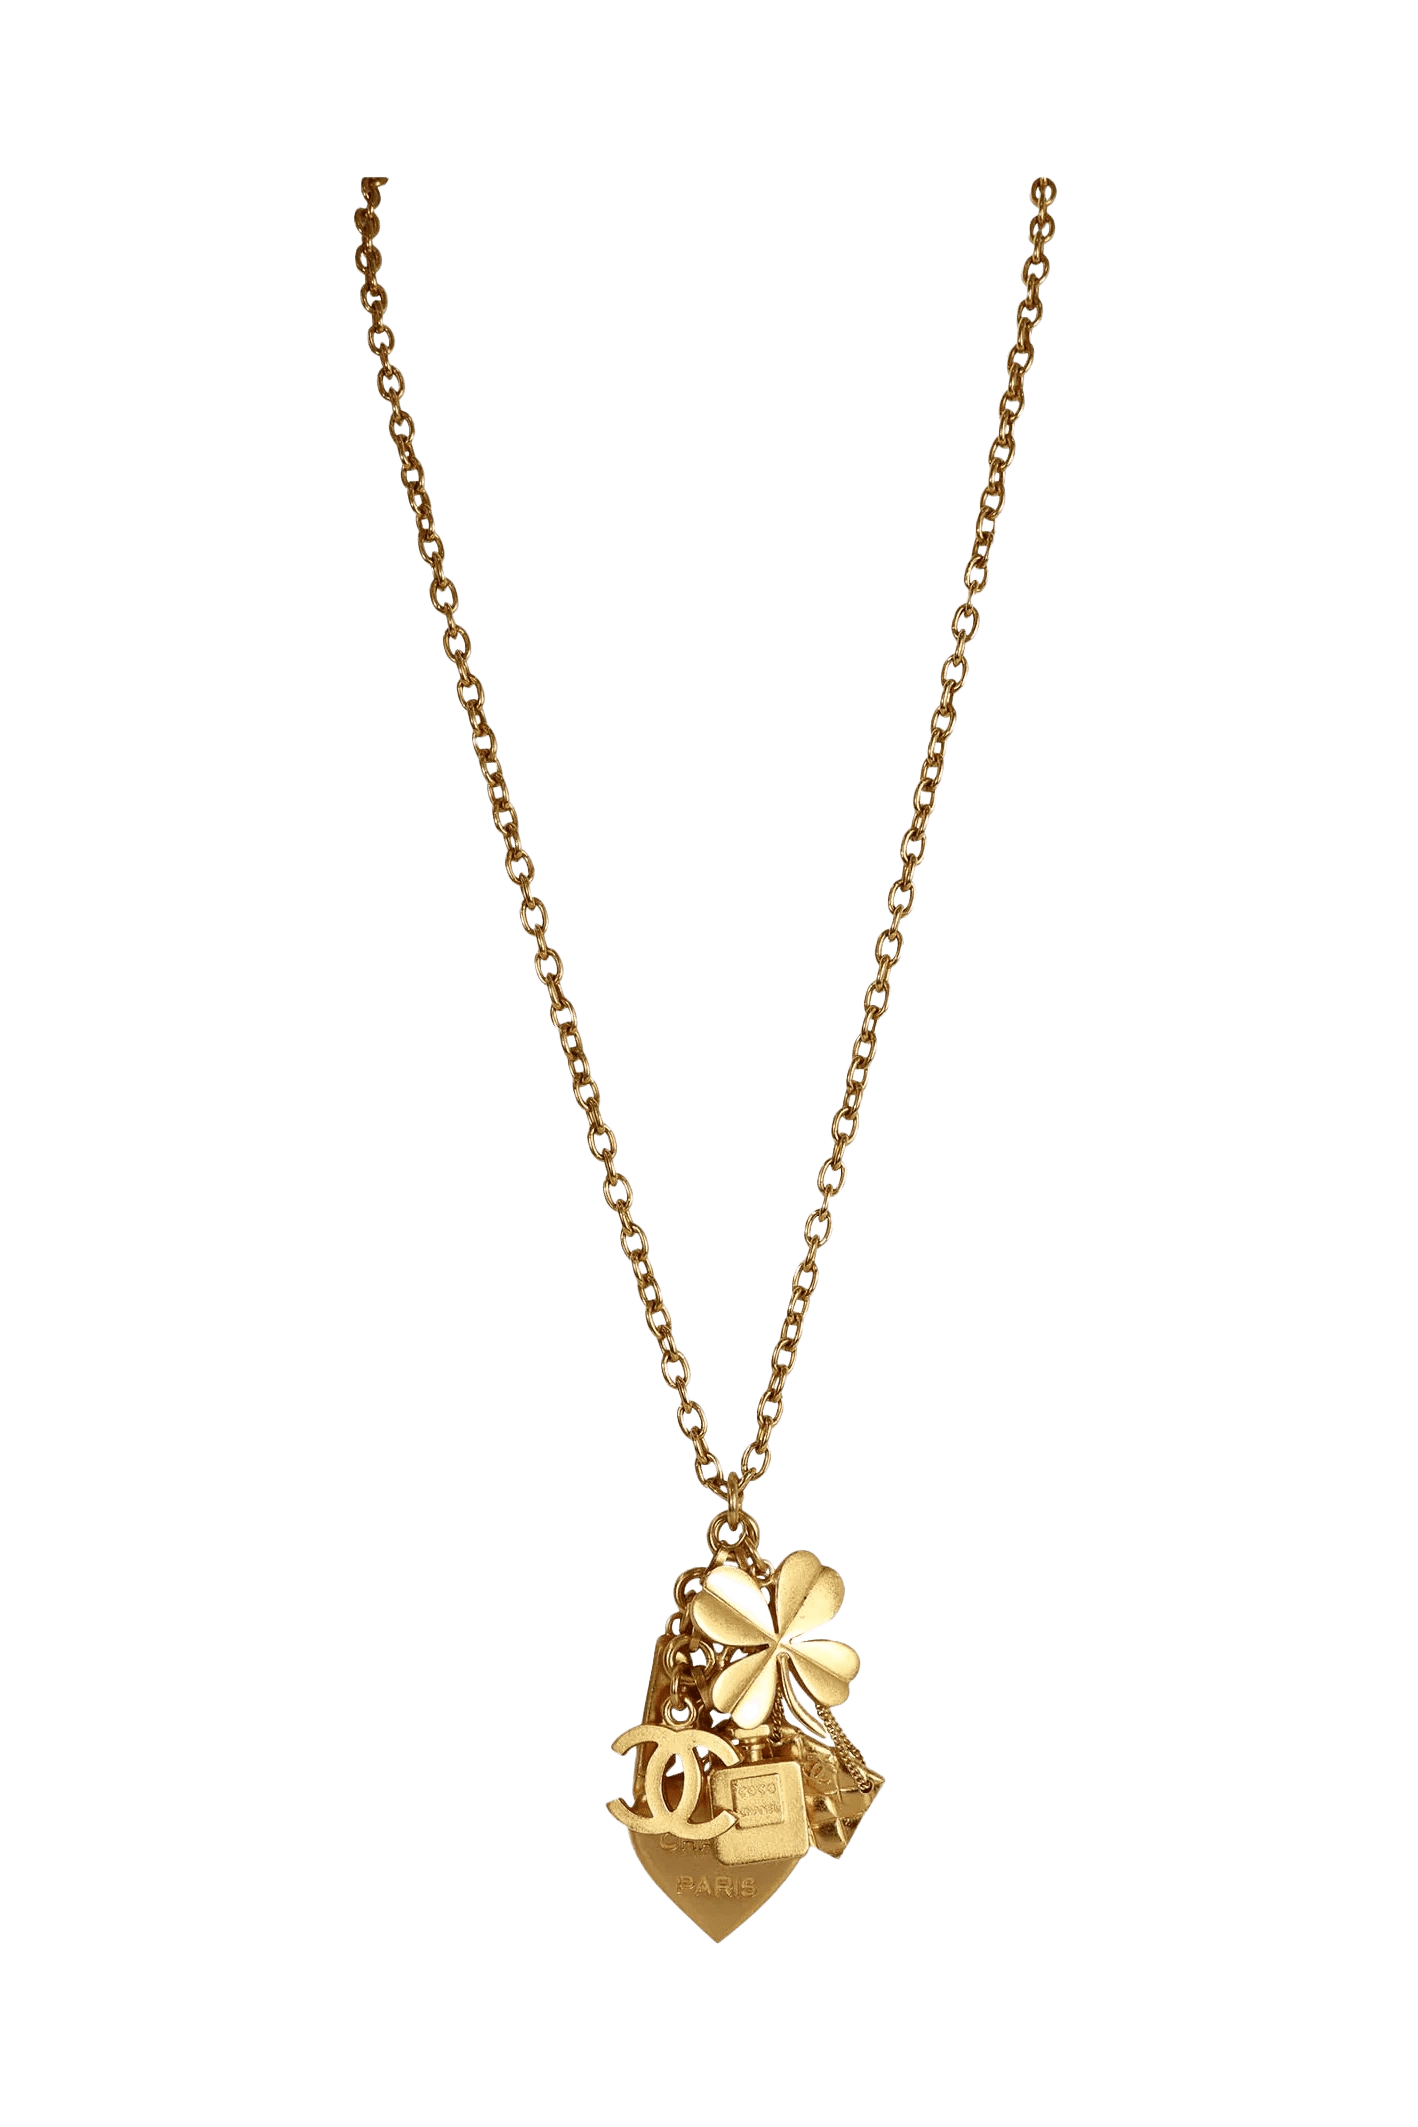 Chanel 1995 24k Gold Plated Lucky Charms Necklace - Foxy Couture Carmel